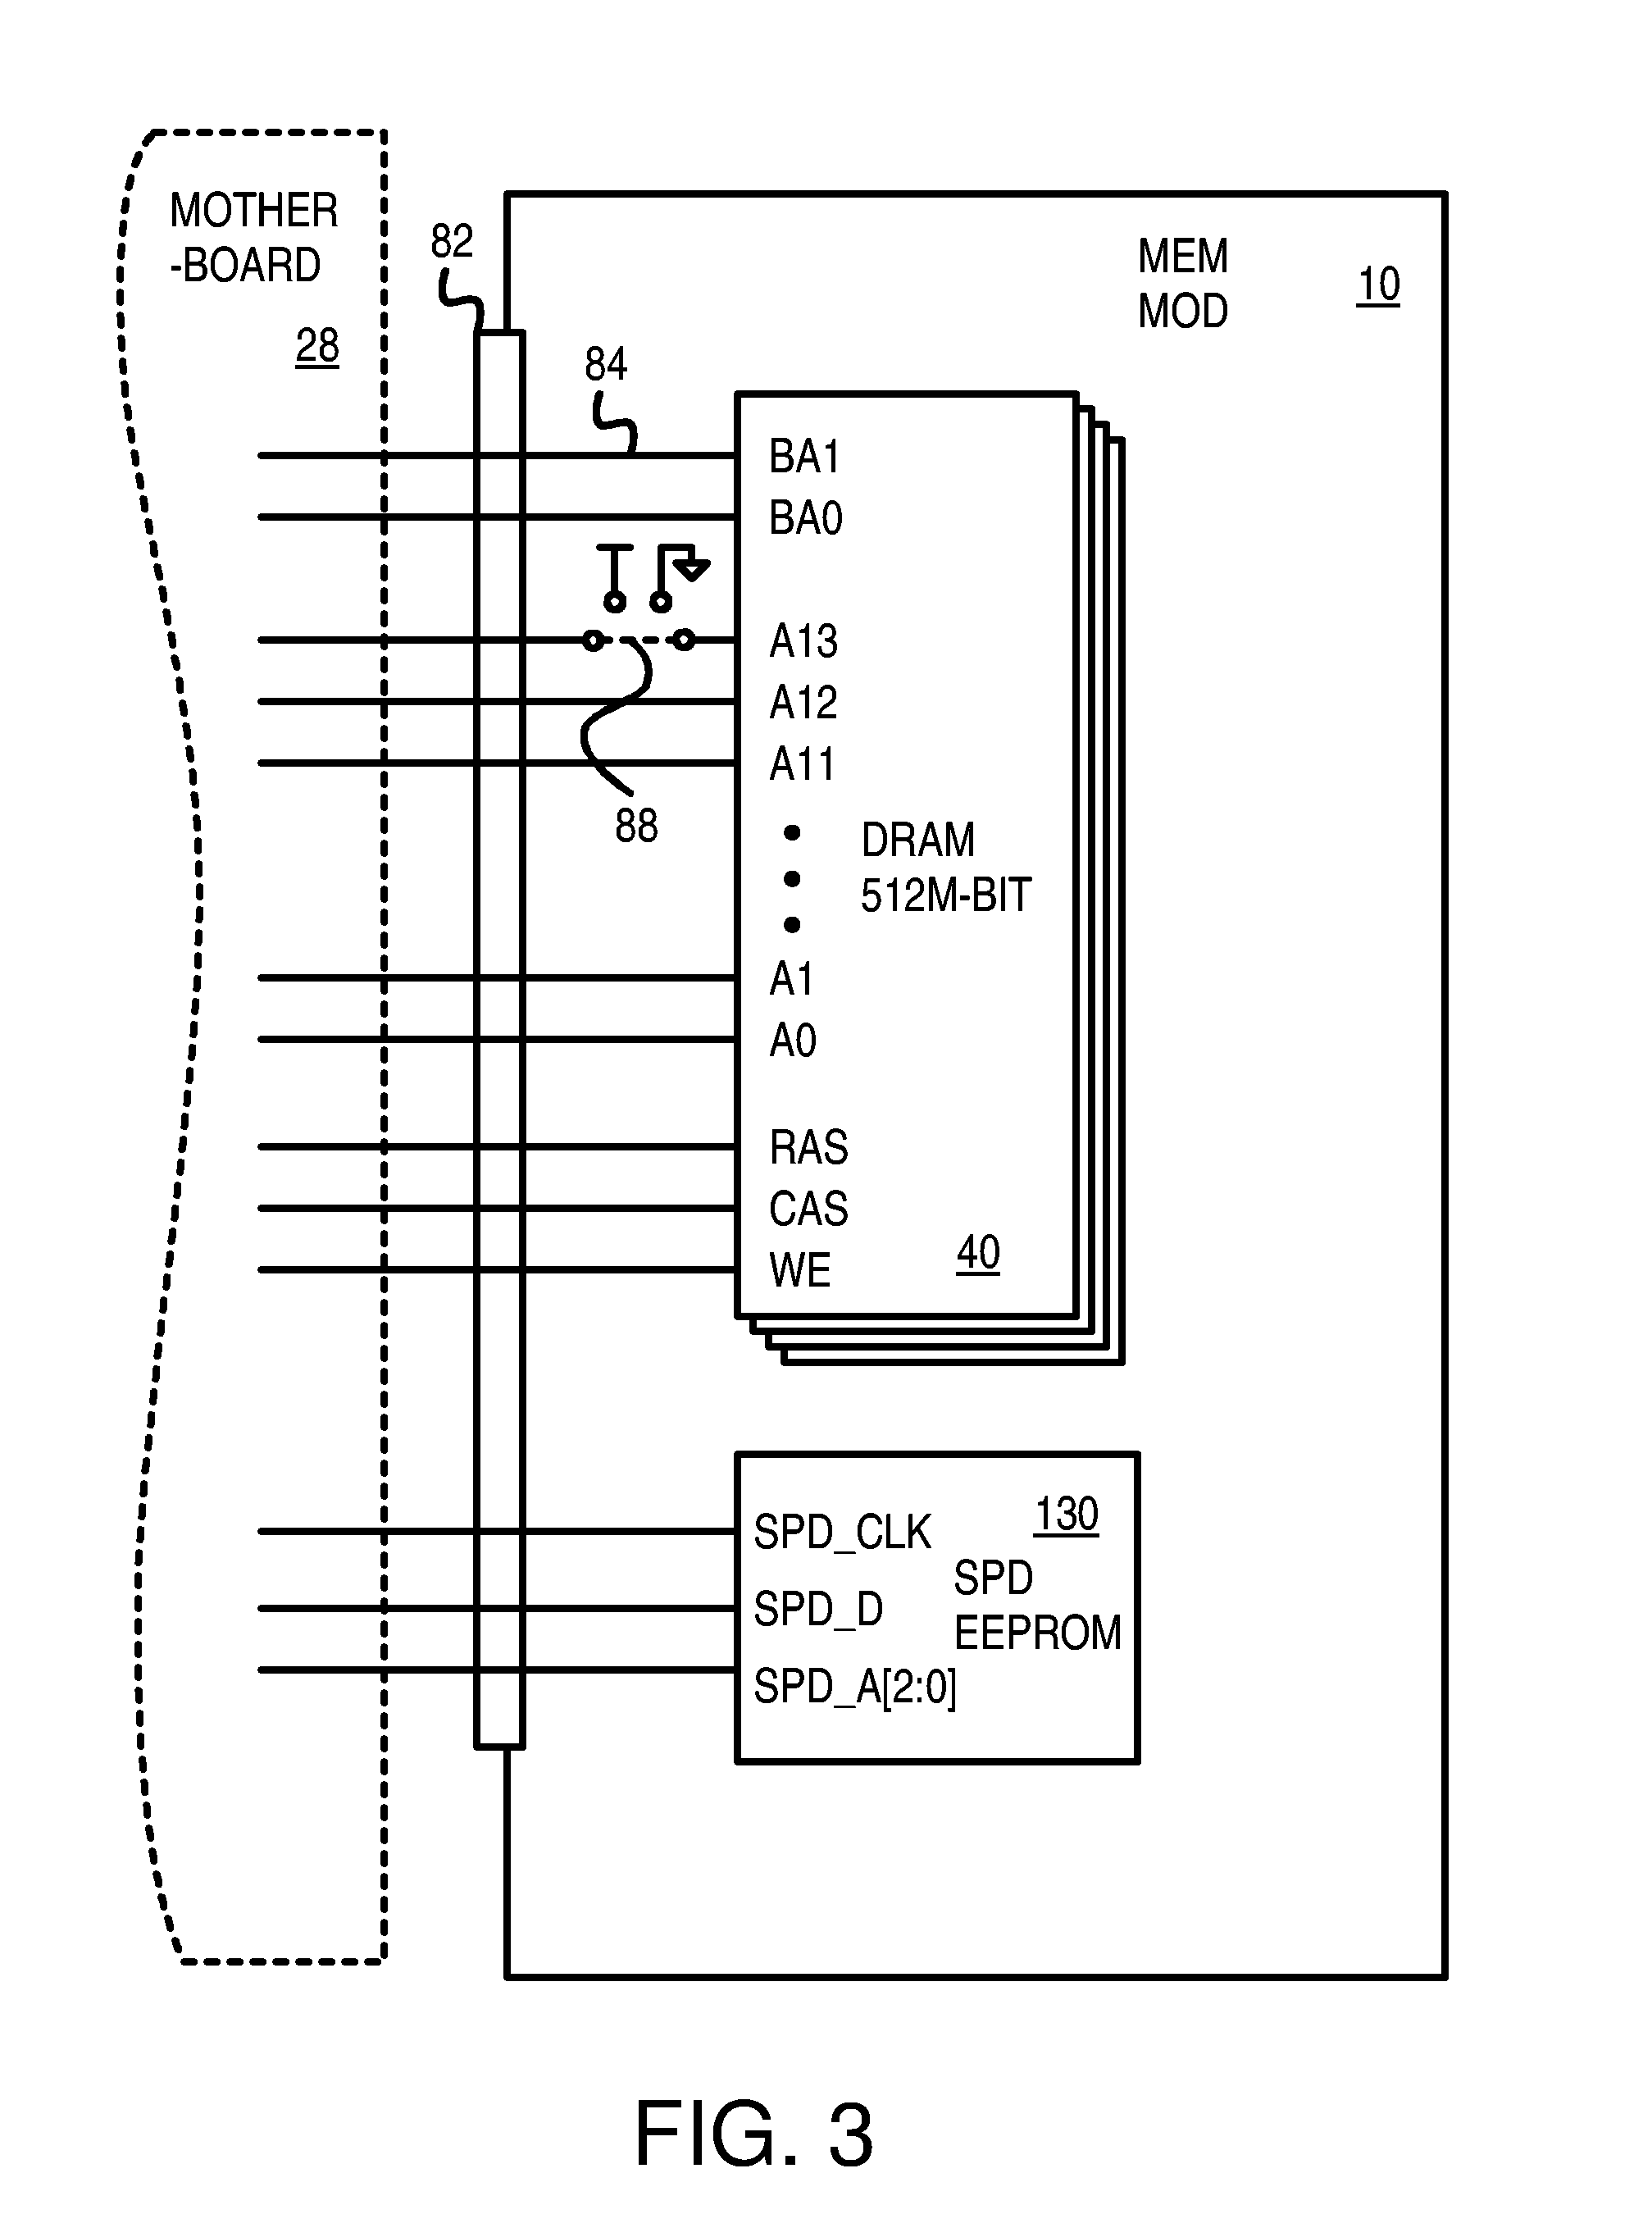 Memory module with a defective memory chip having defective blocks disabled by non-multiplexed address lines to the defective chip